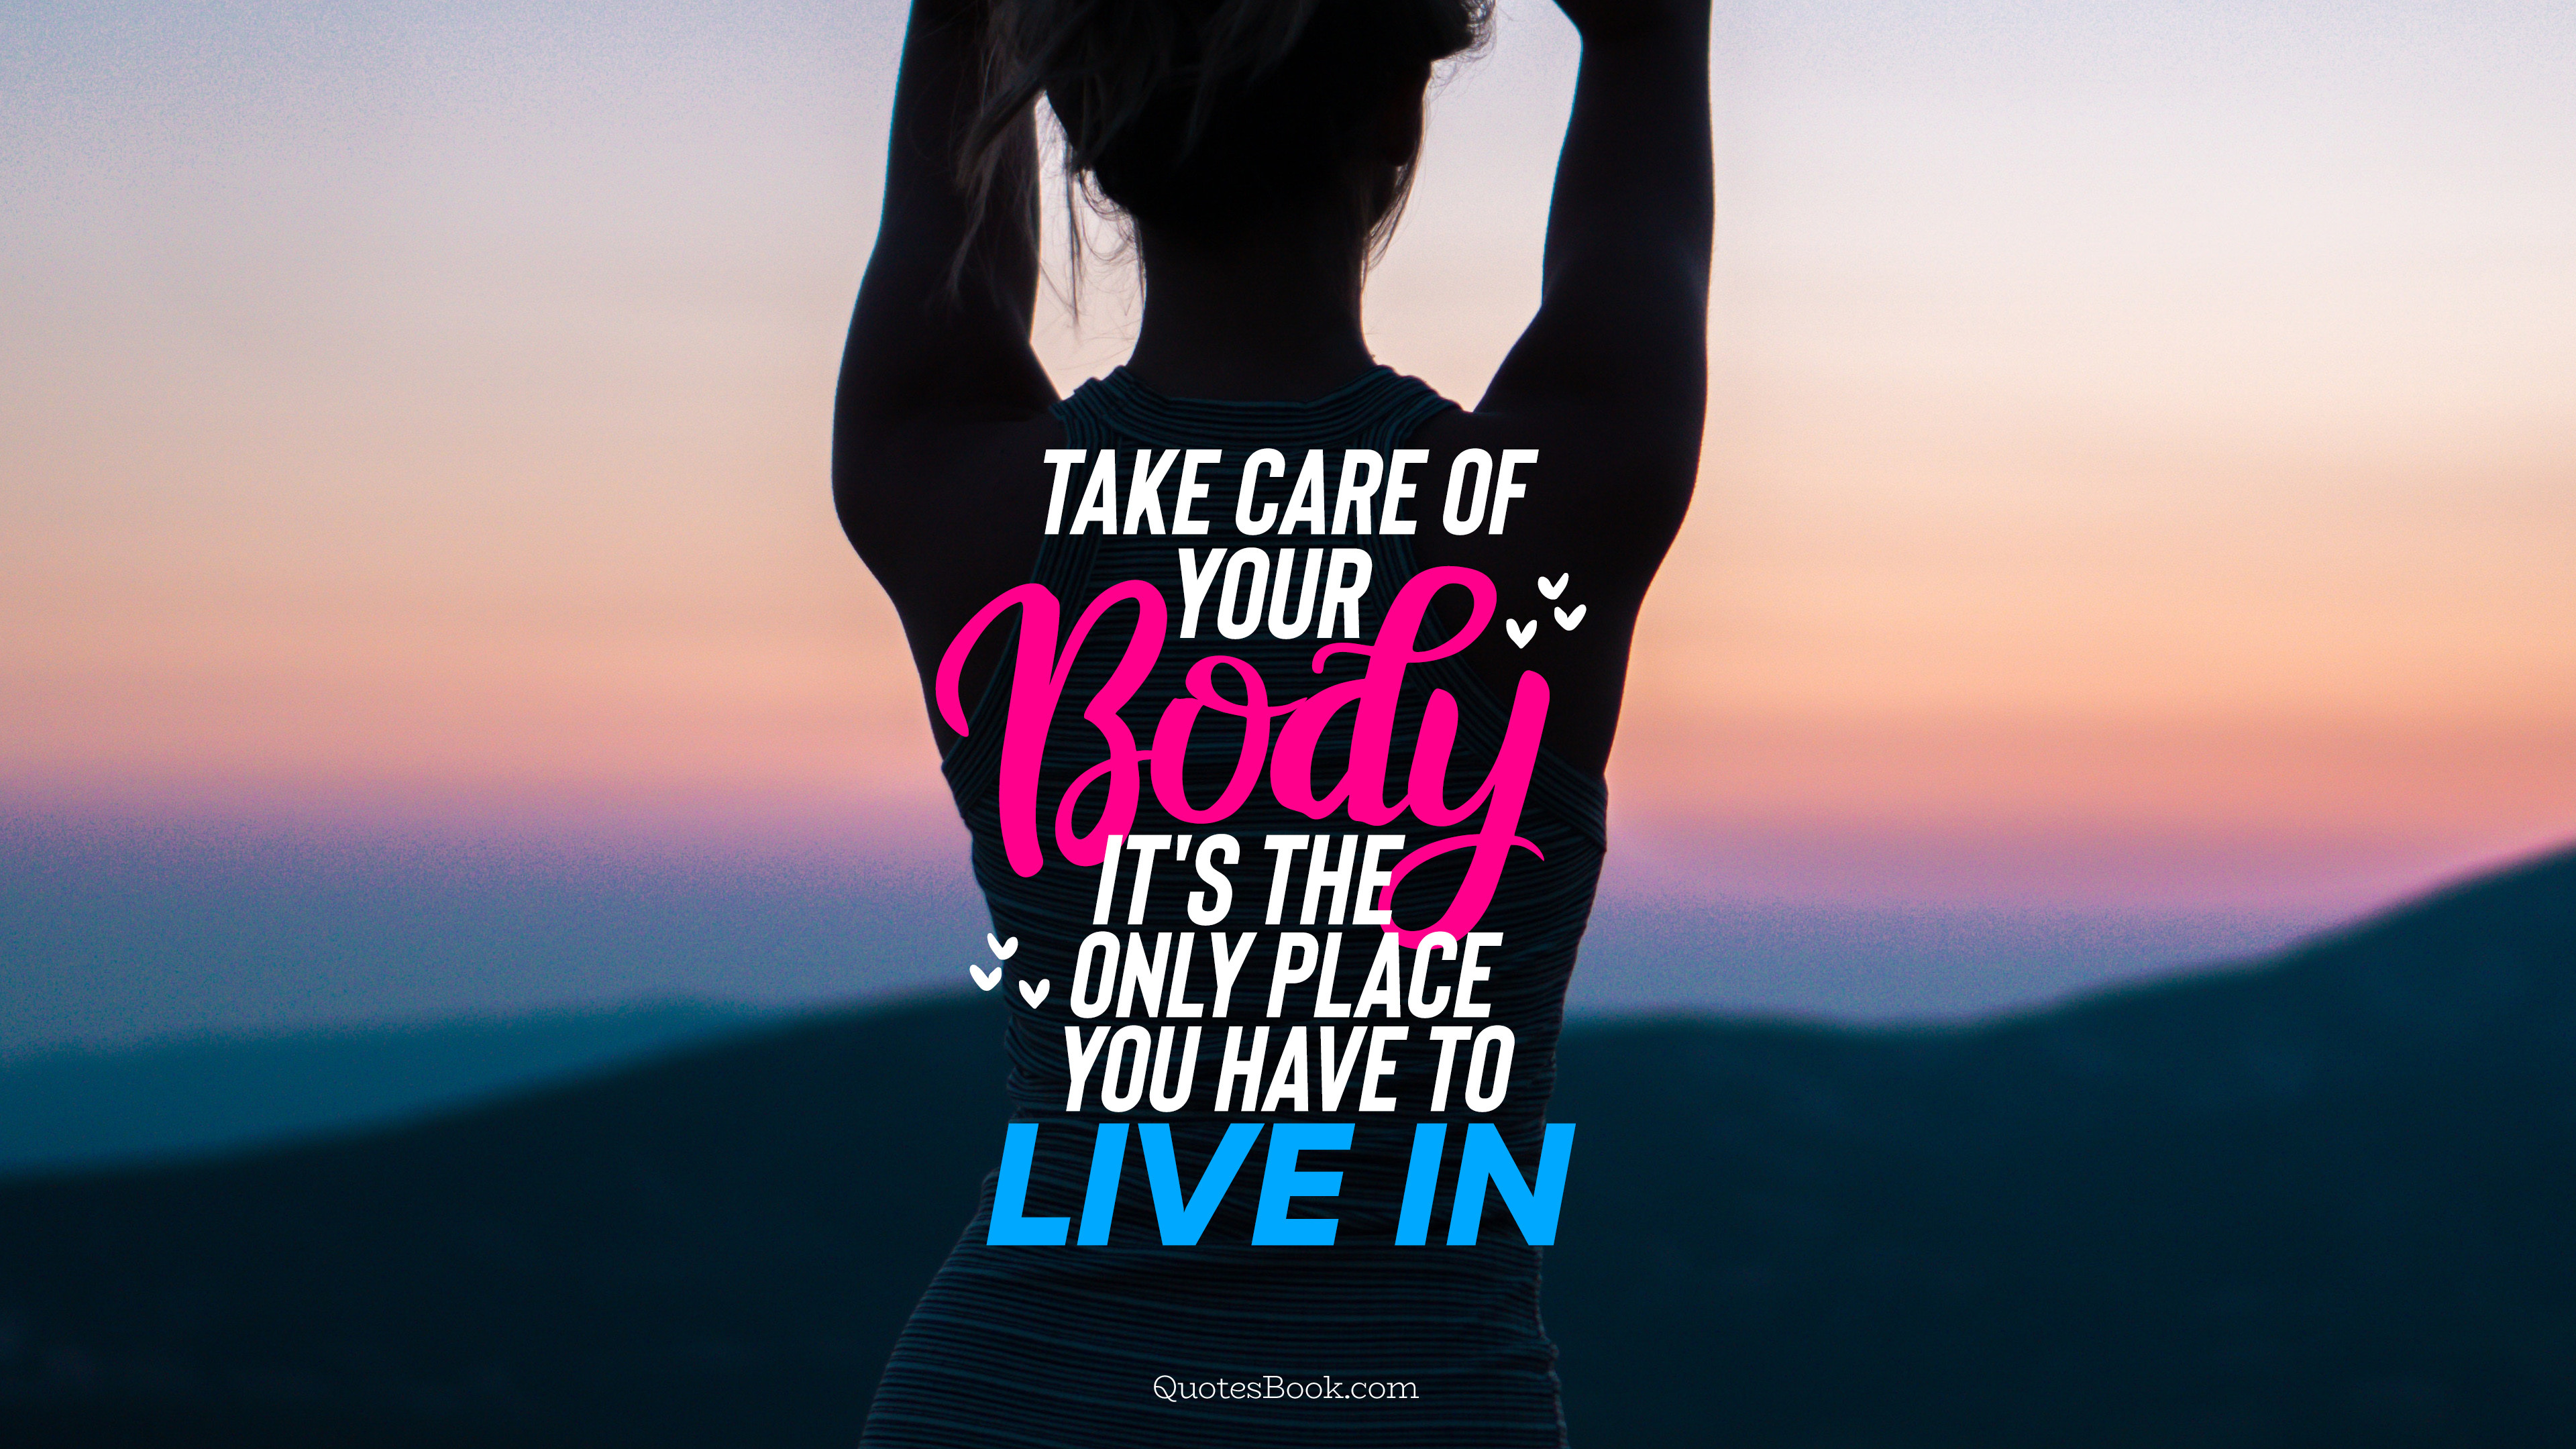 Take care of your body it's the only place you have to live in - QuotesBook